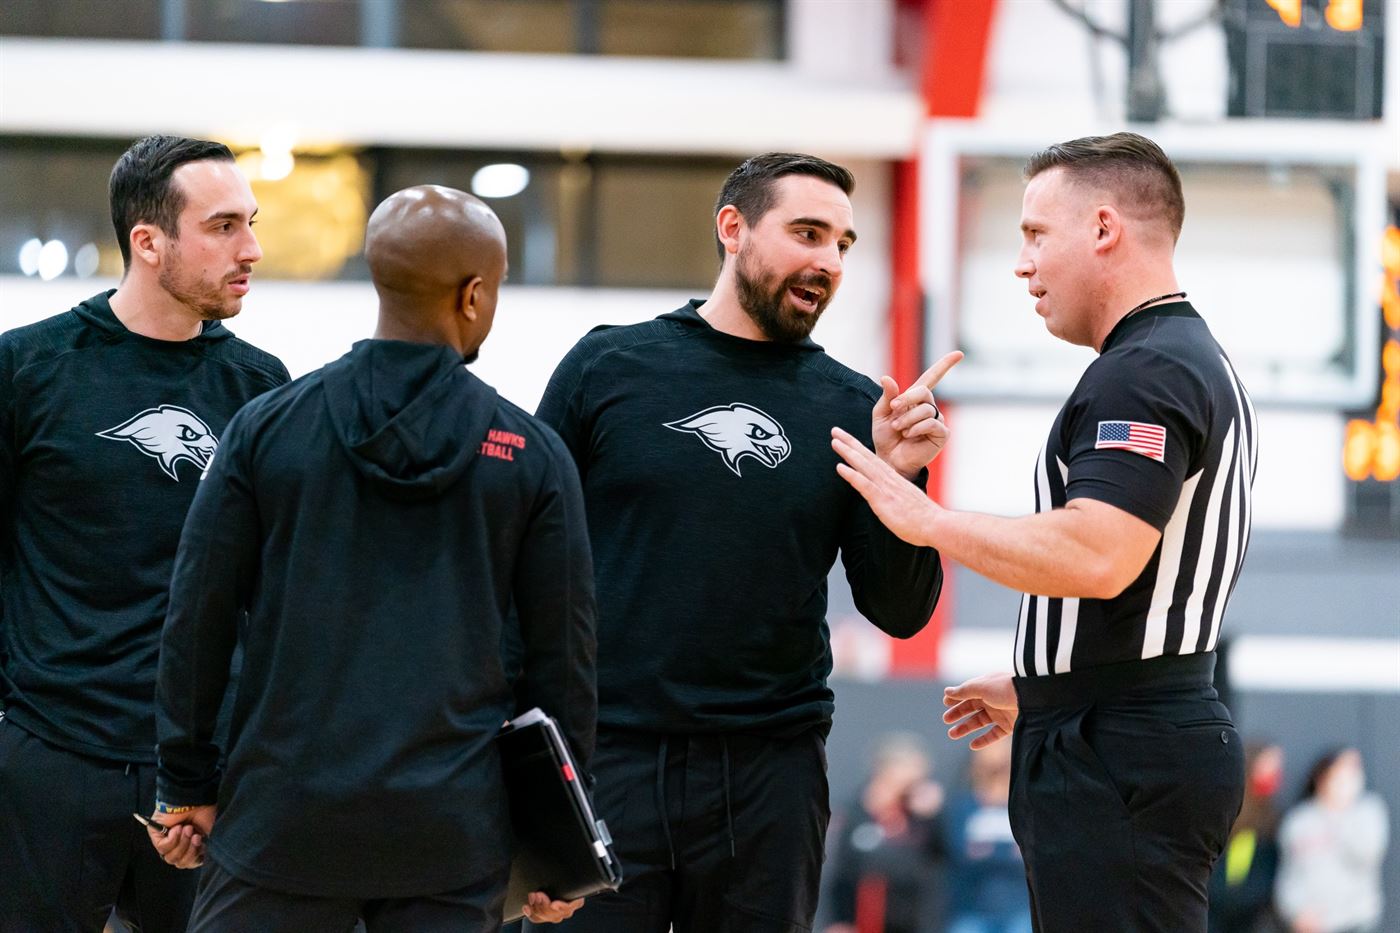 The coaches of the men's basketball team speak to the referee about a controversial call. Chris Krusberg | The Montclarion